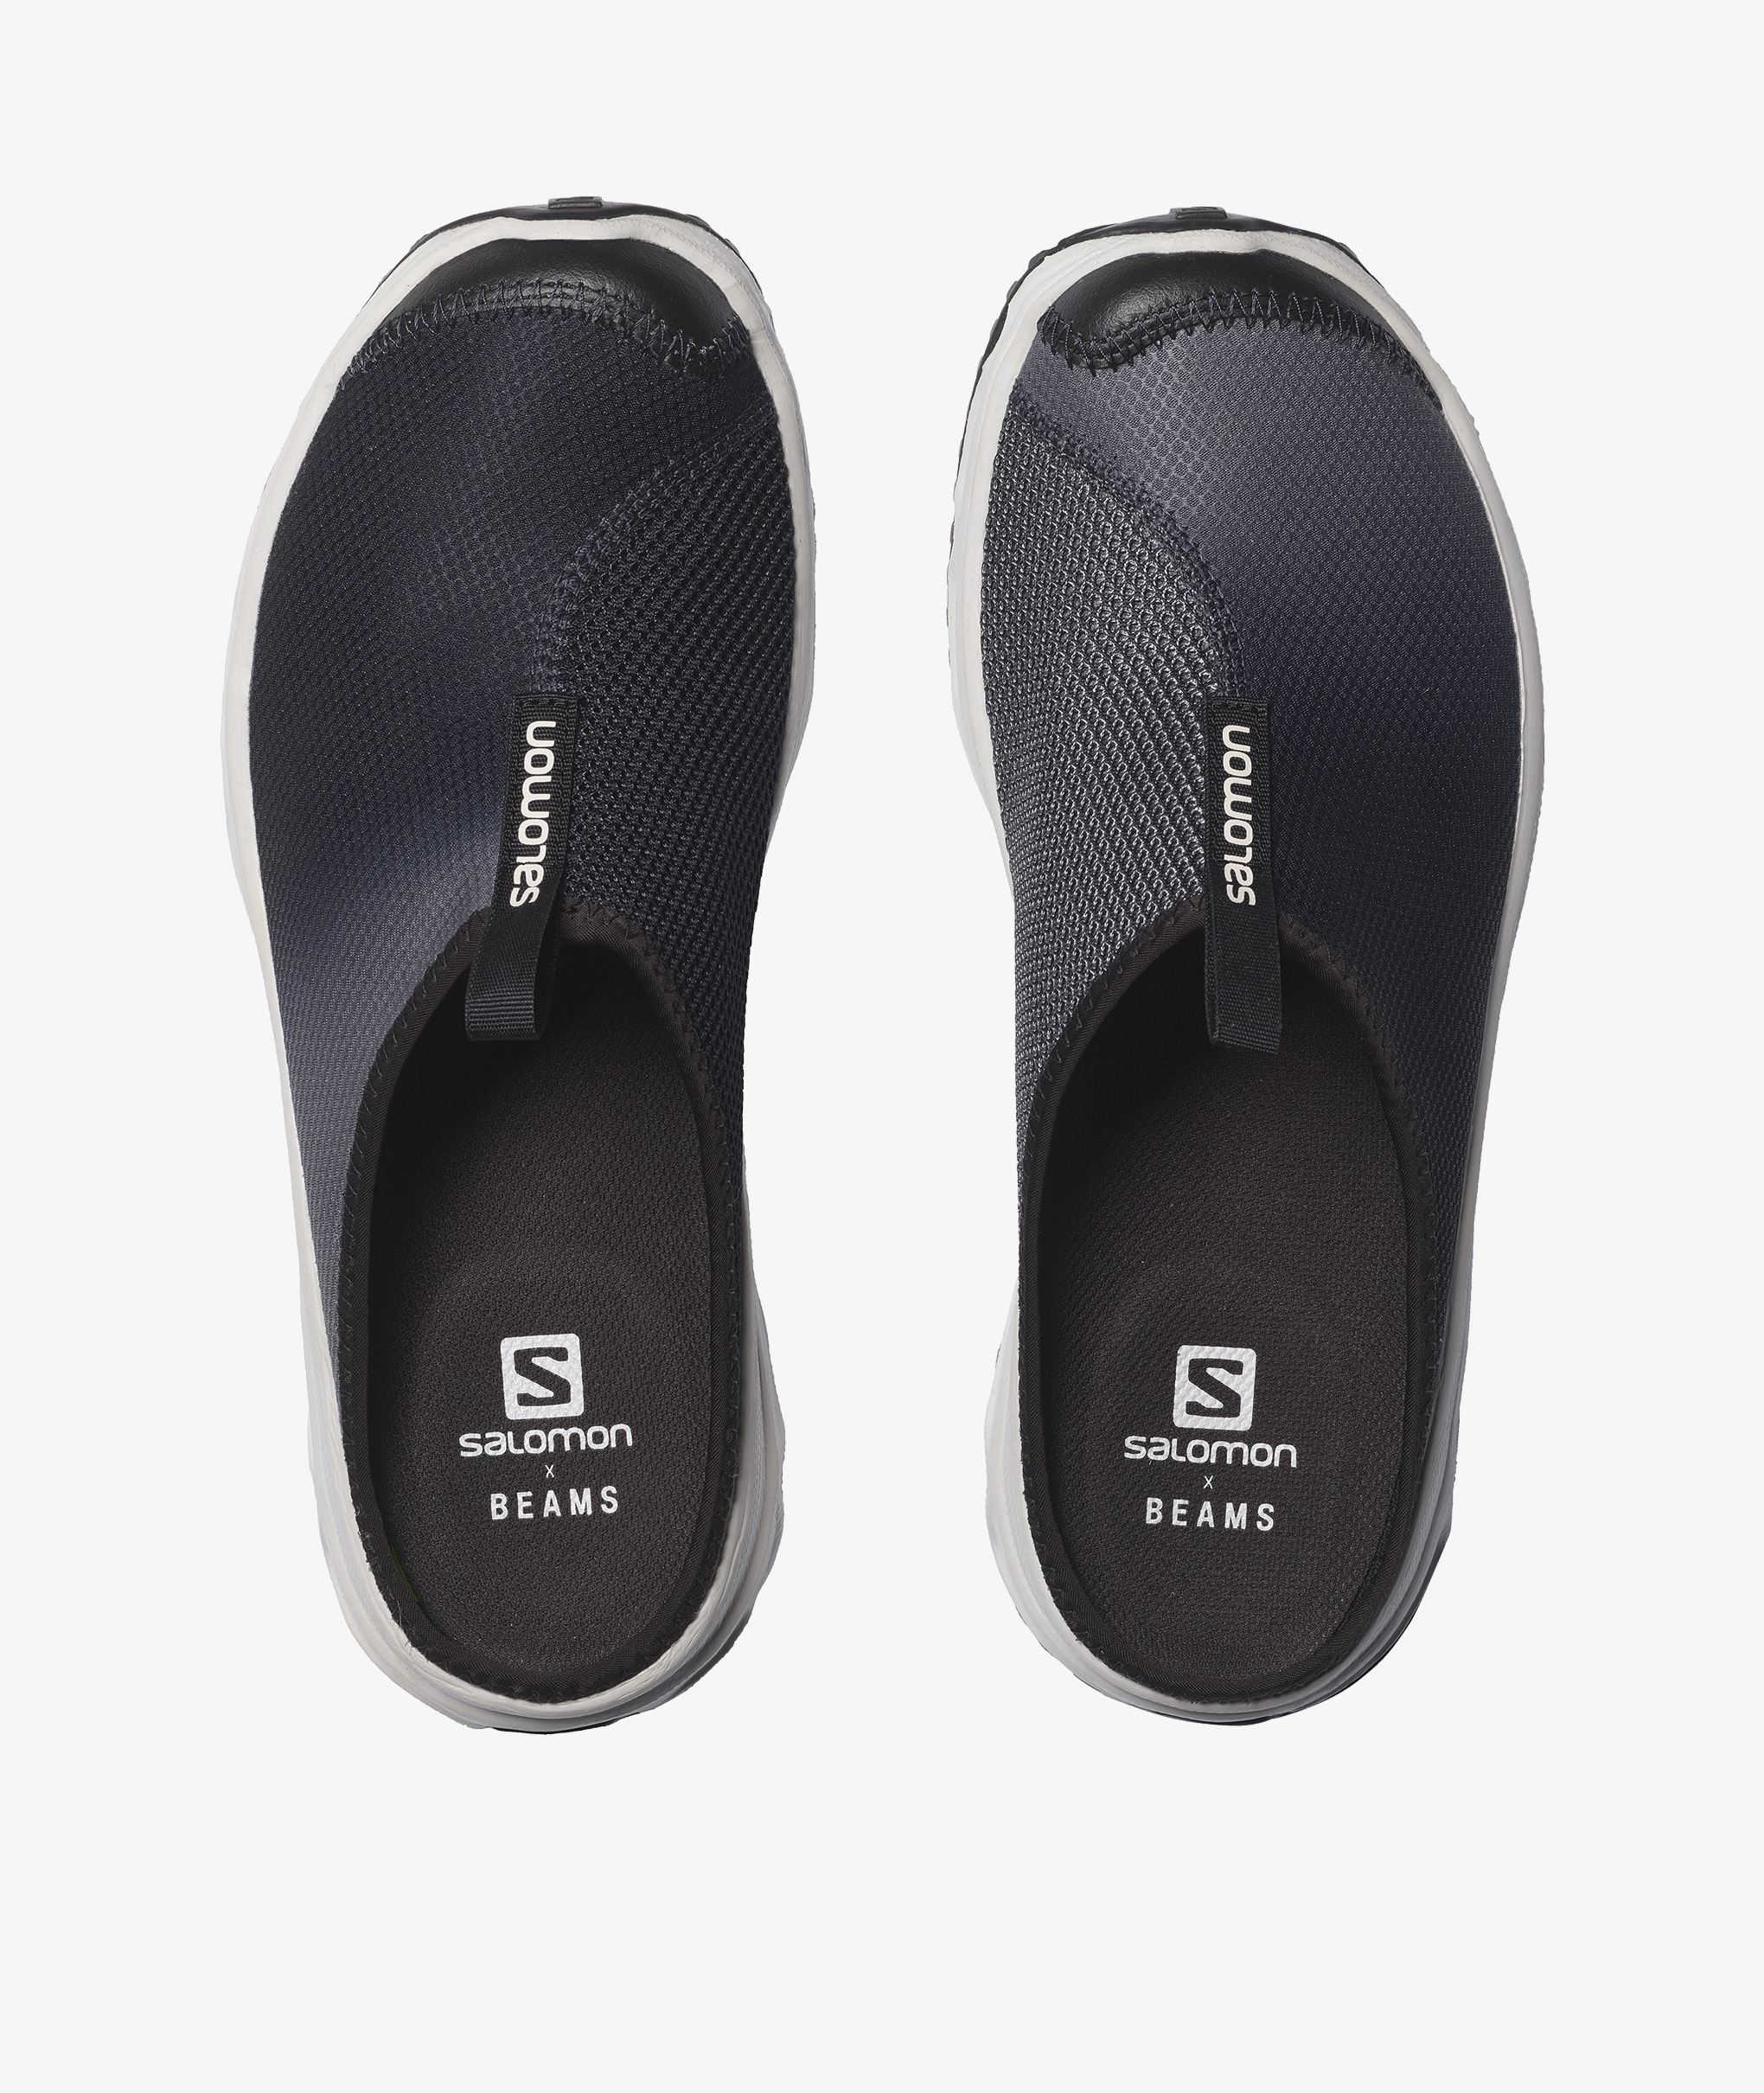 Norse Store | Shipping Worldwide - Salomon RX Slide 3.0 For Beams 